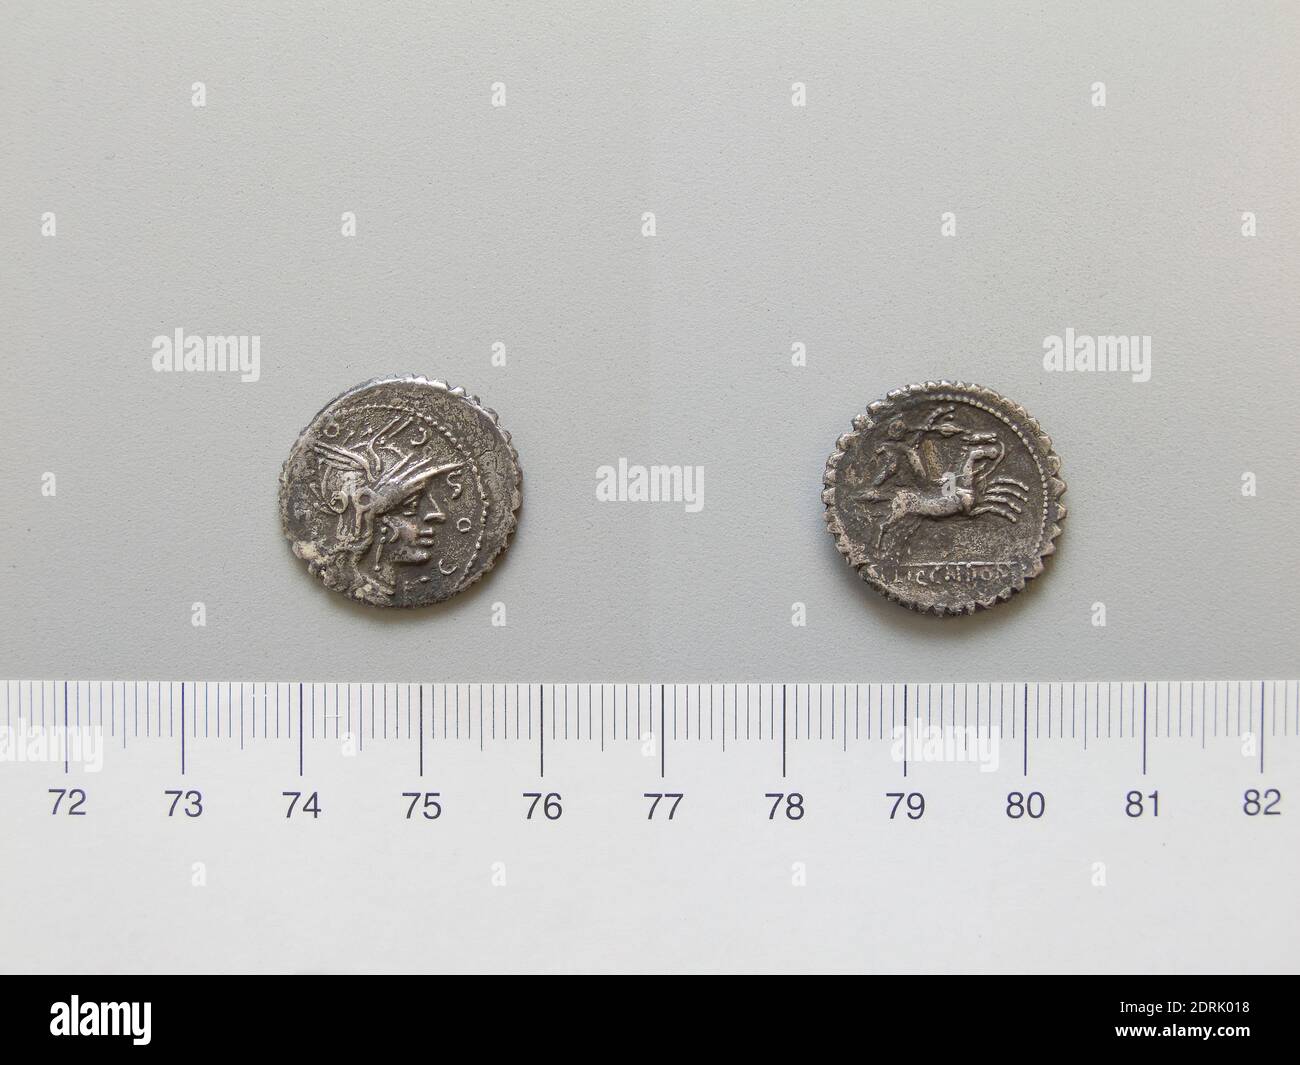 Mint: Narbo, Magistrate: L. LICMagistrate: CN. DOMMagistrate: L. COSCO M. F, Denarius from Narbo, 118 B.C., Silver, 3.69 g, 7:00, 20 mm, Made in Narbo, Roman, 2nd century B.C., Numismatics Stock Photo